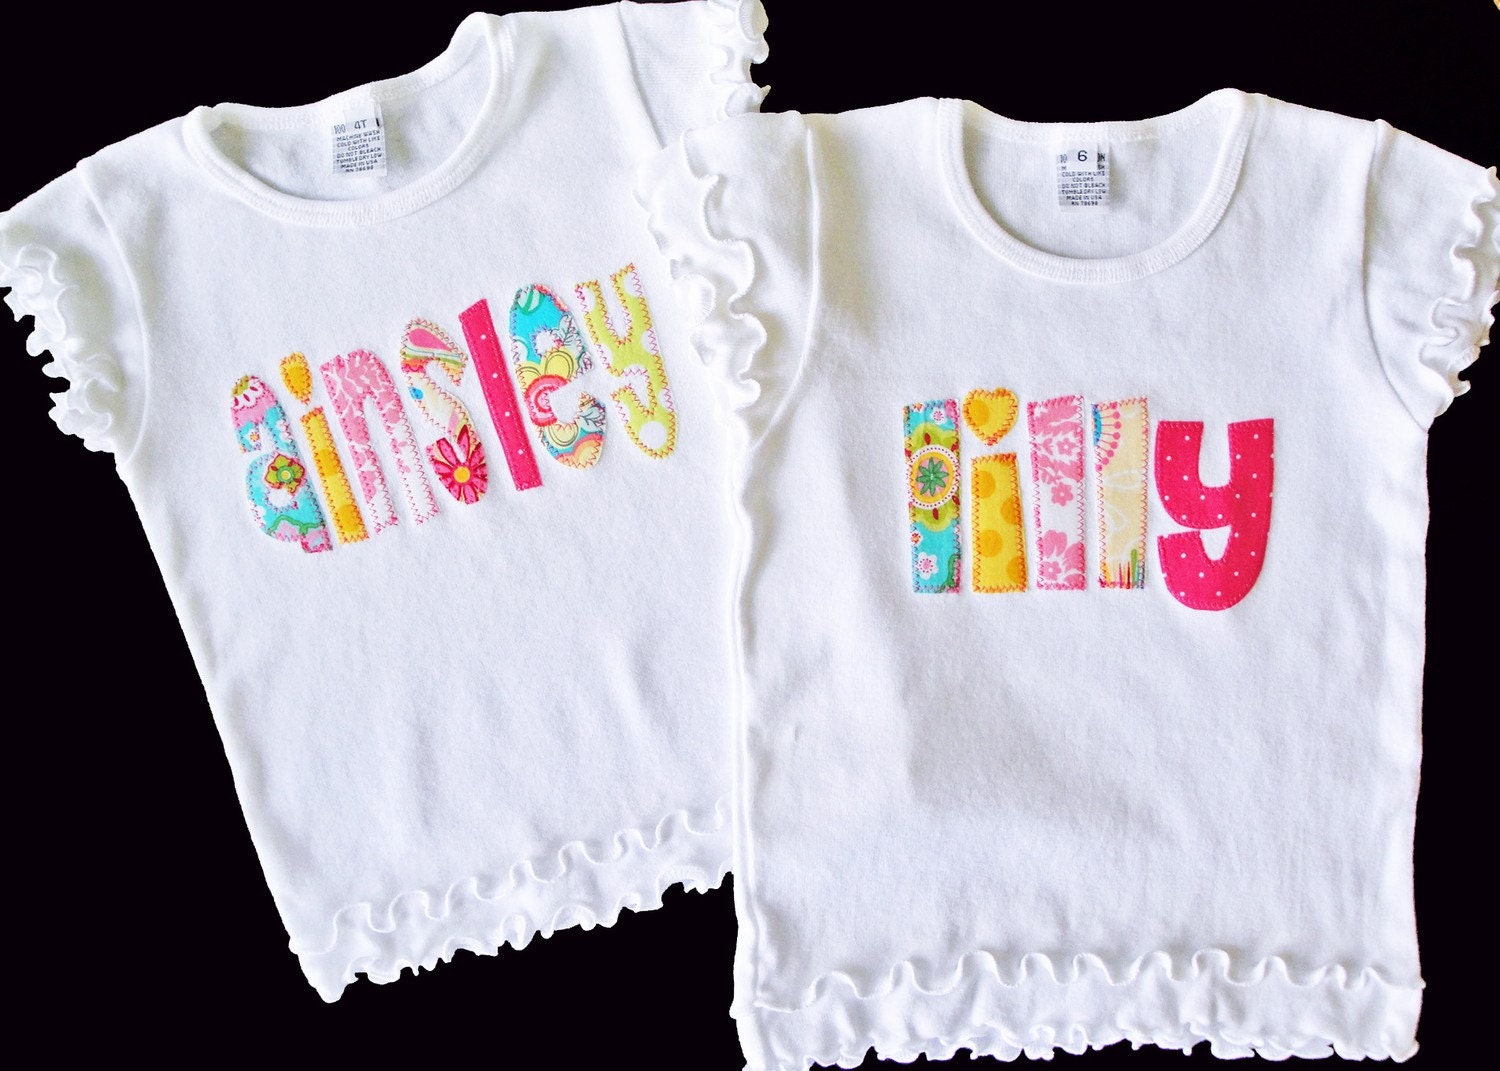 Ruffled Personalized Name Shirt Custom Made For Your Little One 12m to 6Y